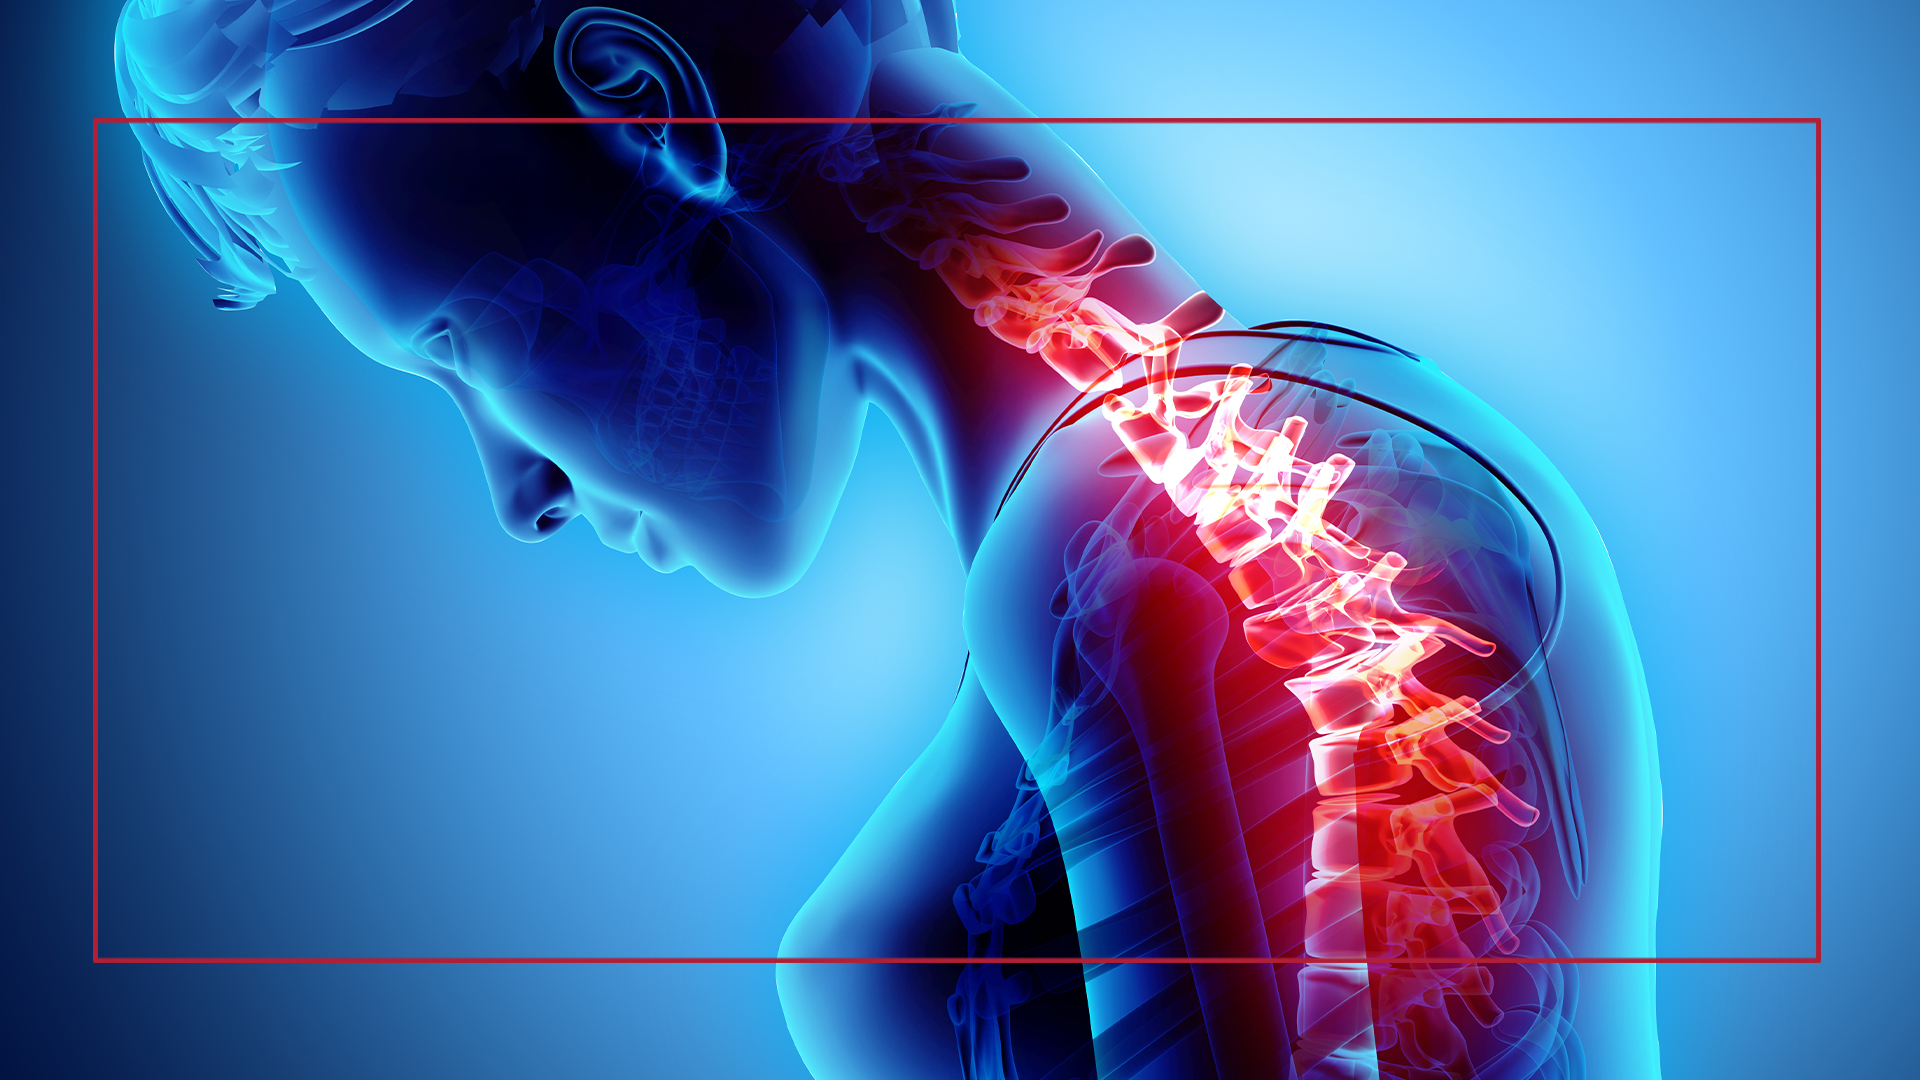 Boca Raton Spinal Cord Injury Lawyer. West Palm Beach